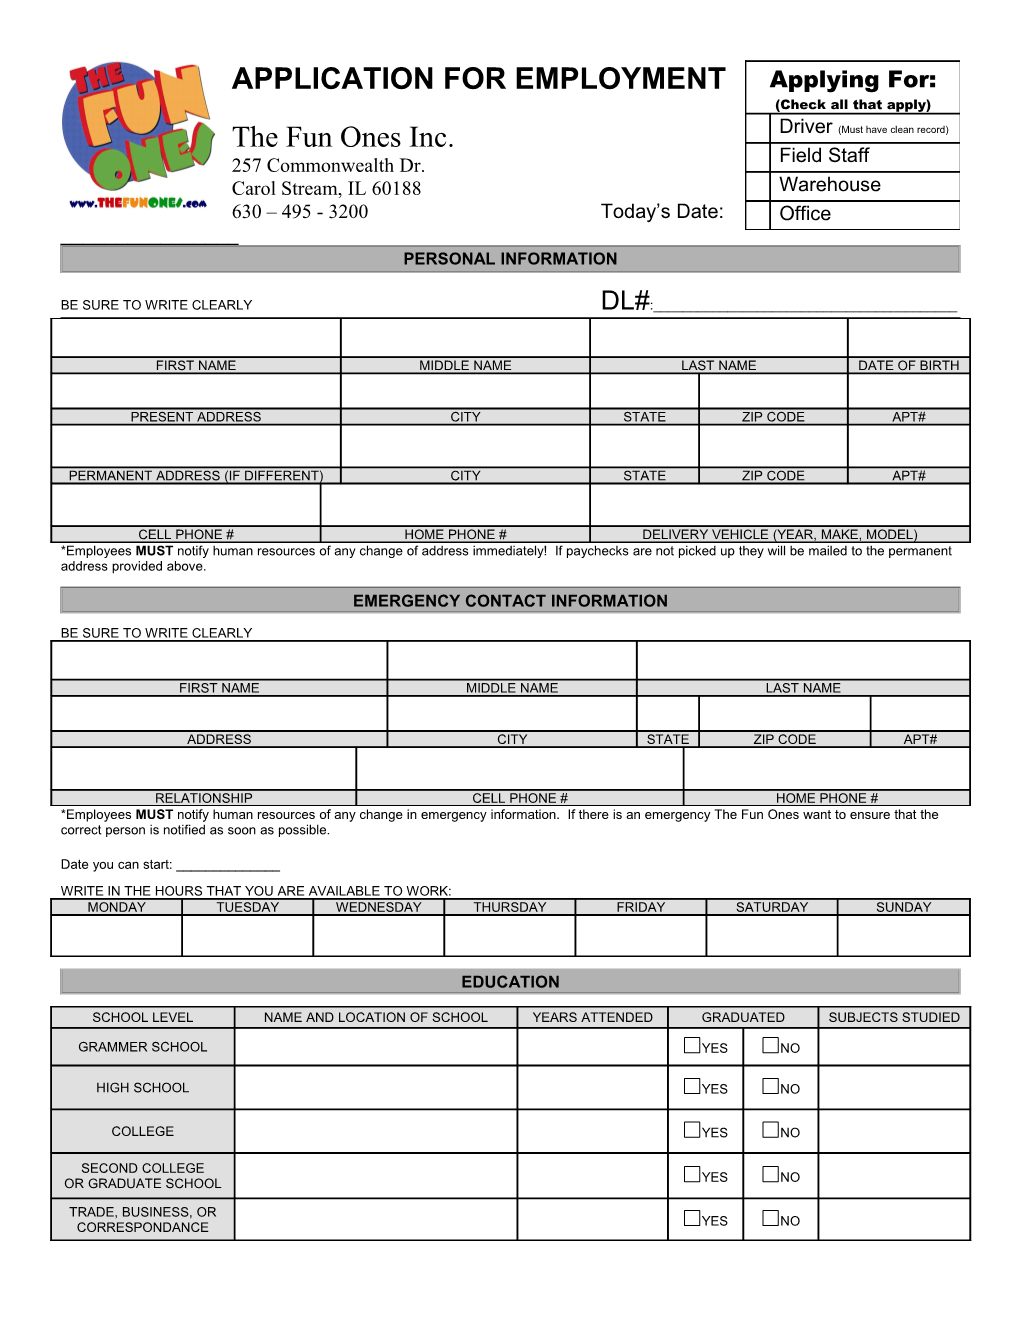 Application for Employment s41